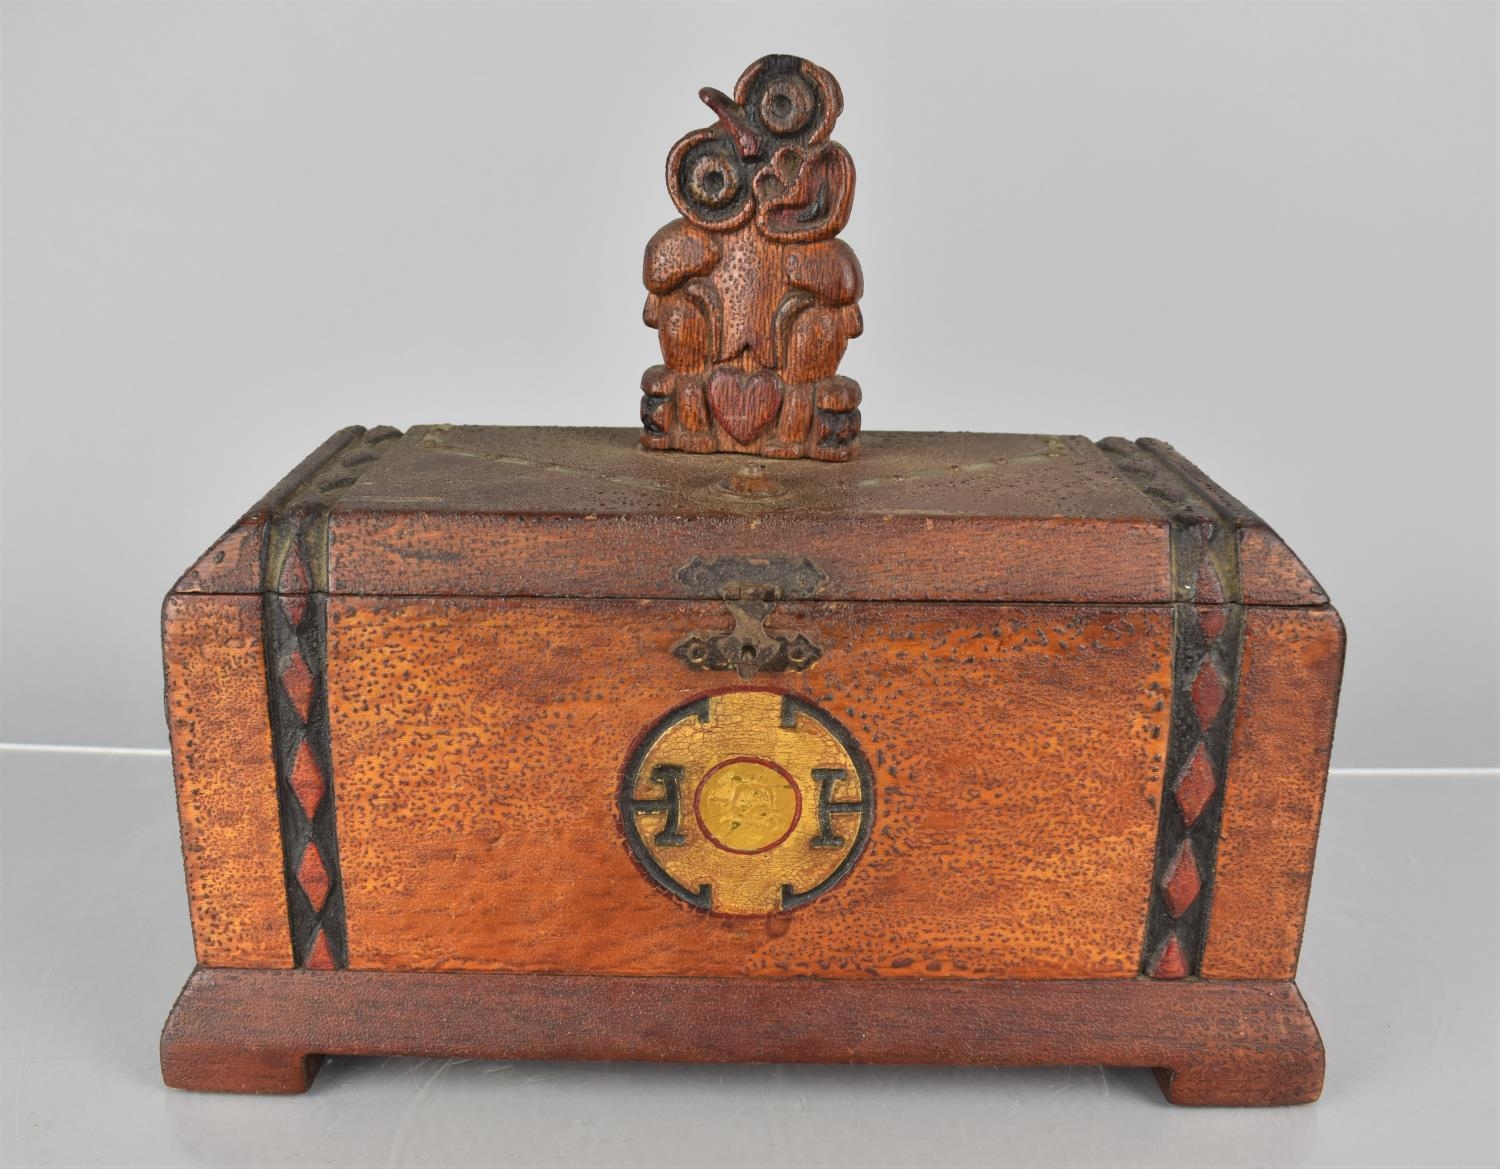 An Early 20th Century New Zealand Maori Carved Wooden Box, Top Decorated with a Carved Hei-Tiki - Image 6 of 6